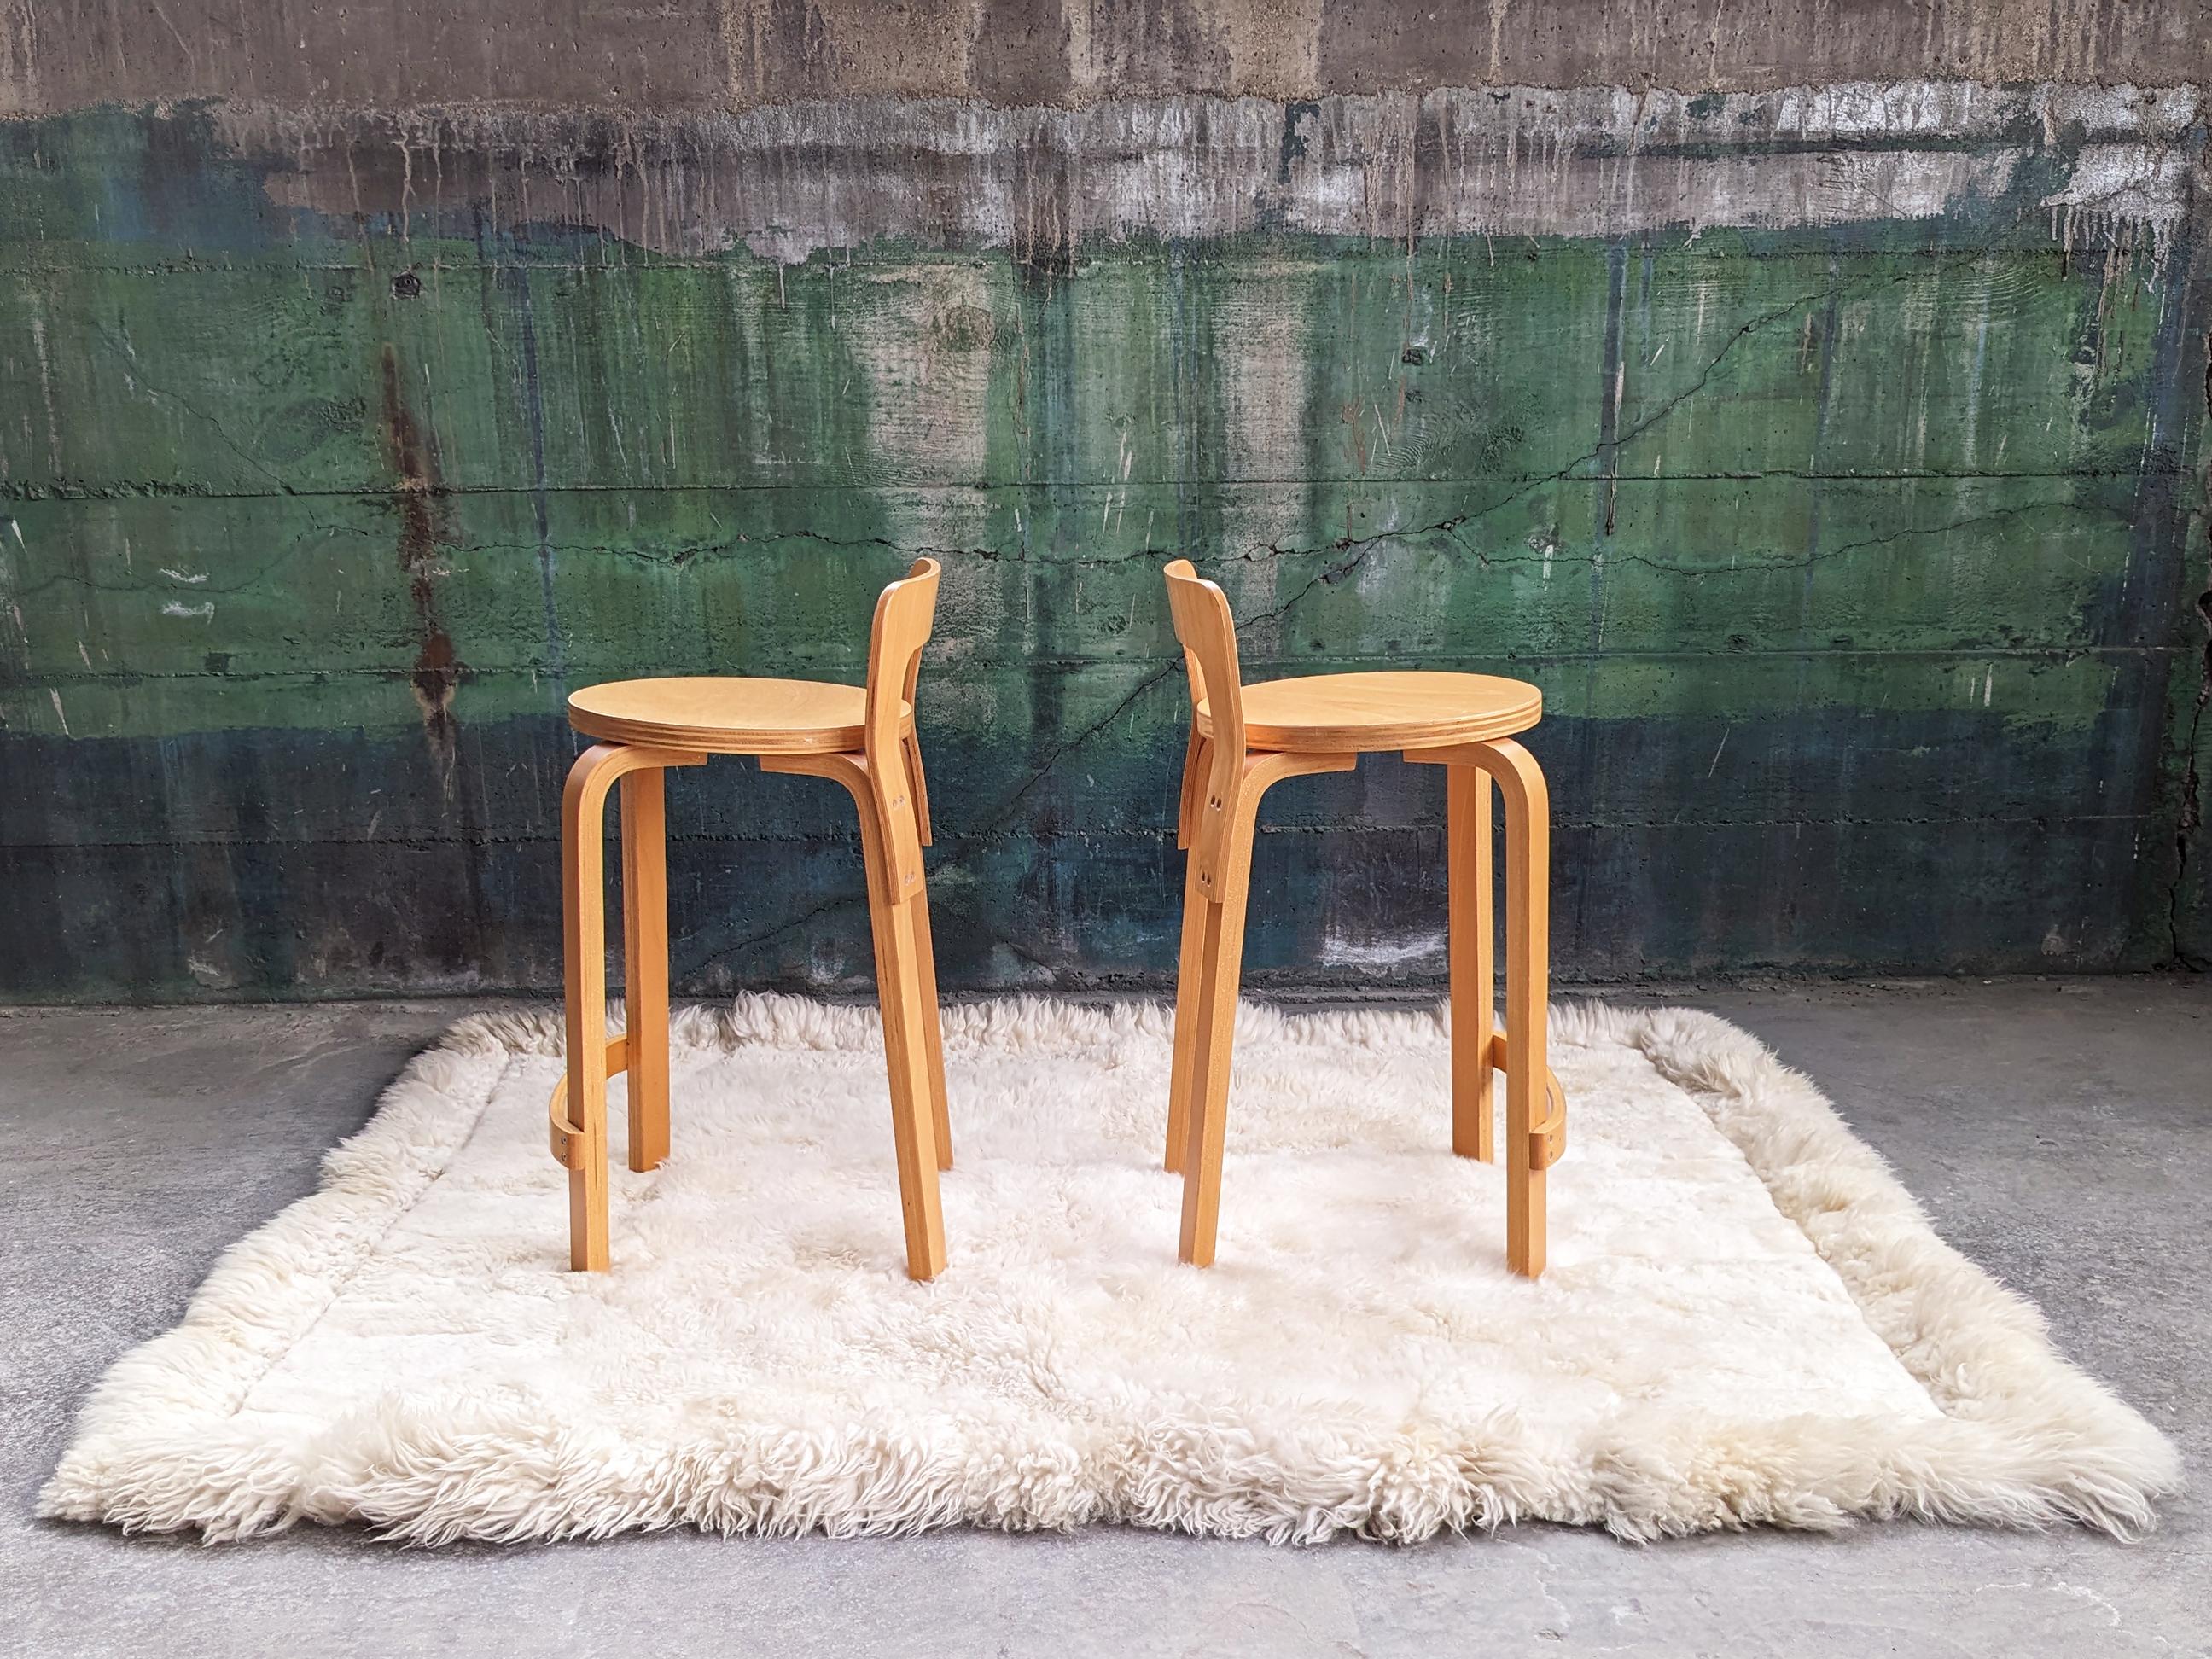 Pair of 1960s Birch Wood K65 Alvar Aalto Stools by Artek-- 2 Pieces In Good Condition For Sale In Madison, WI